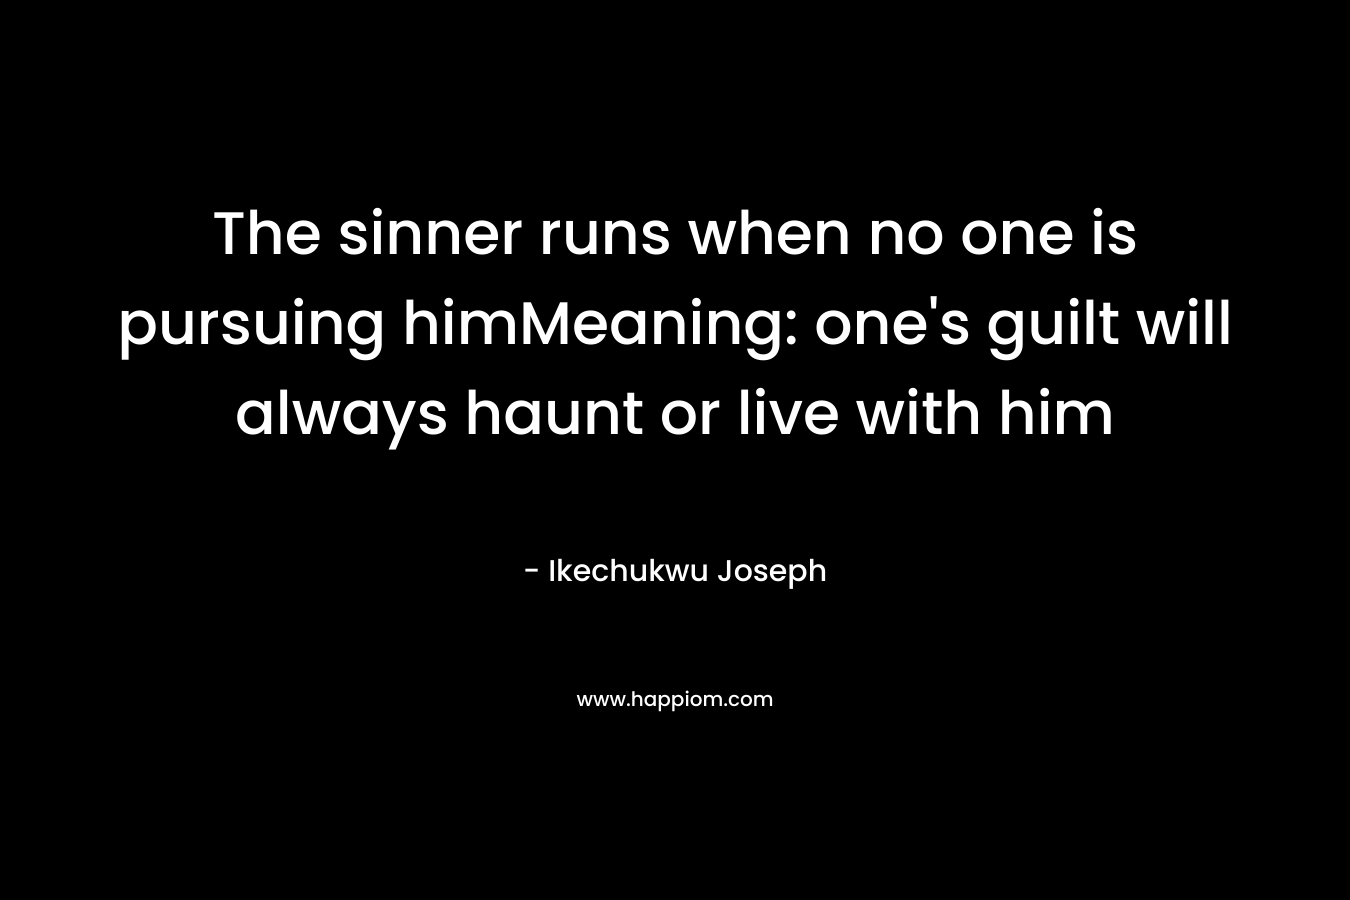 The sinner runs when no one is pursuing himMeaning: one’s guilt will always haunt or live with him – Ikechukwu Joseph